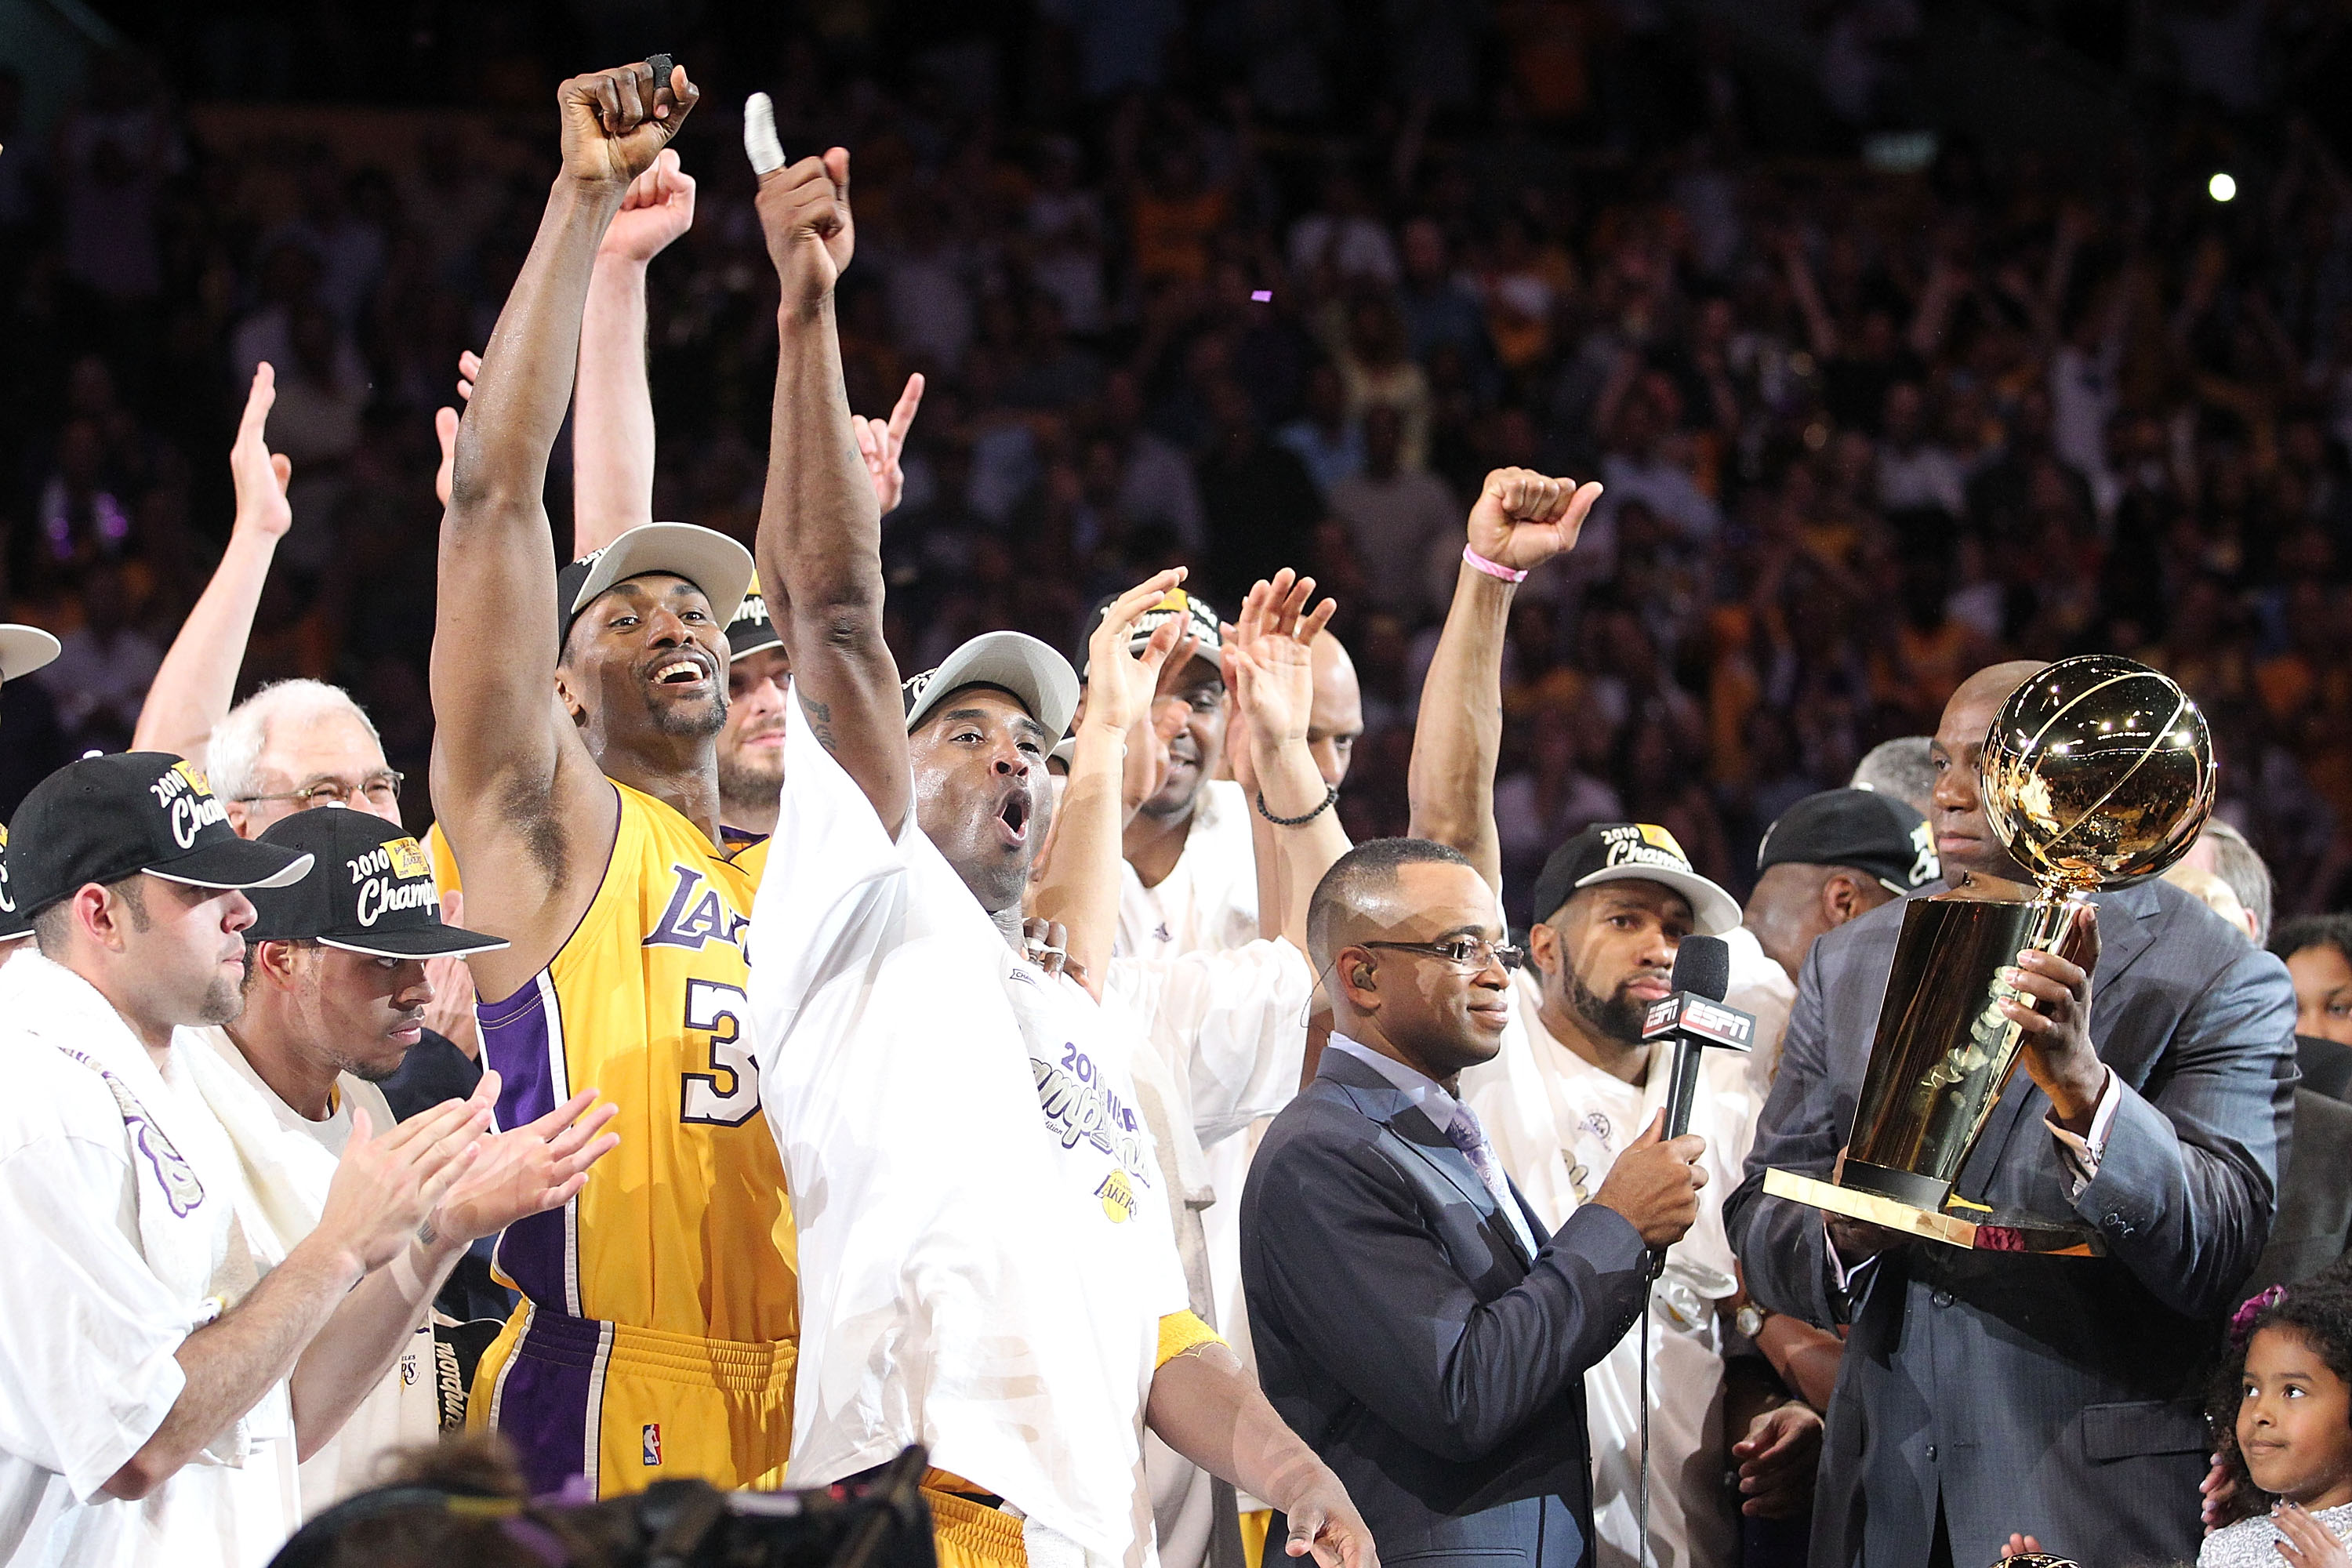 LOS ANGELES, CA - JUNE 17:  Kobe Bryant #24 of the Los Angeles Lakers h celebrates after the Lakers defeated the Boston Celtics 83-79 in Game Seven of the 2010 NBA Finals at Staples Center on June 17, 2010 in Los Angeles, California.  NOTE TO USER: User e